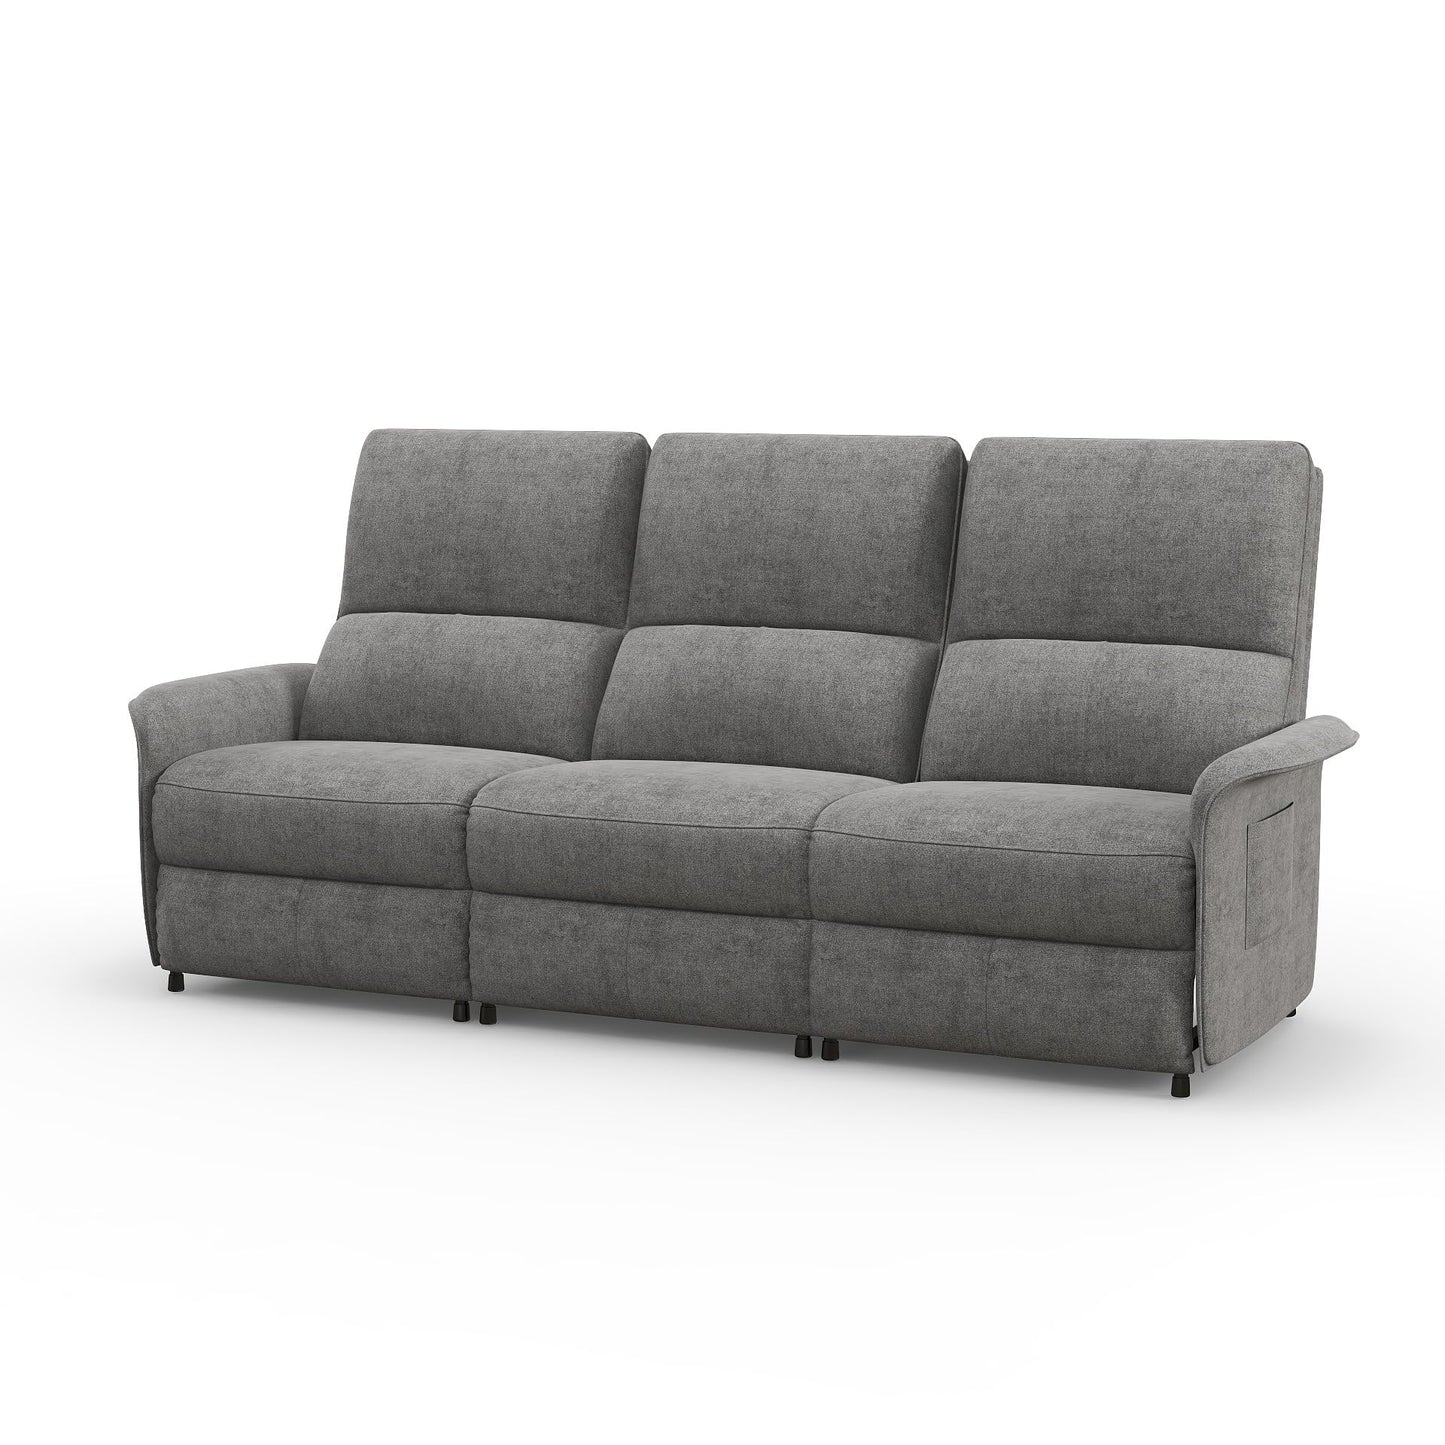 Panana Grey Fabric Electric Recliner Sofa Suites Settee Lazy Boy, 1 2 3 Seater Powered Armchair with Storage Side Pockets for Small Speace (2 + 3 Seater)